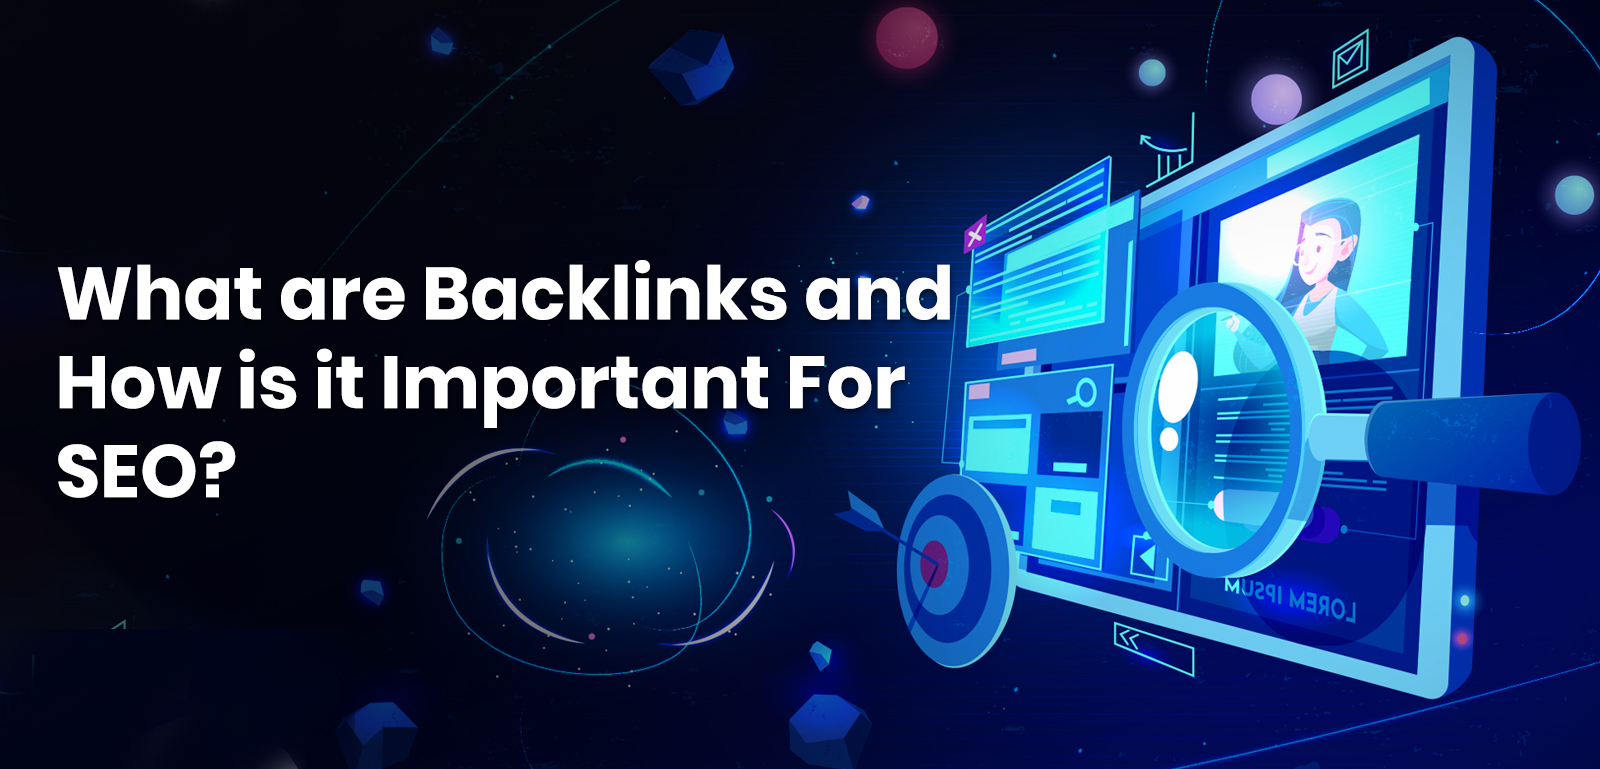 What are Backlinks and how is it important for SEO?